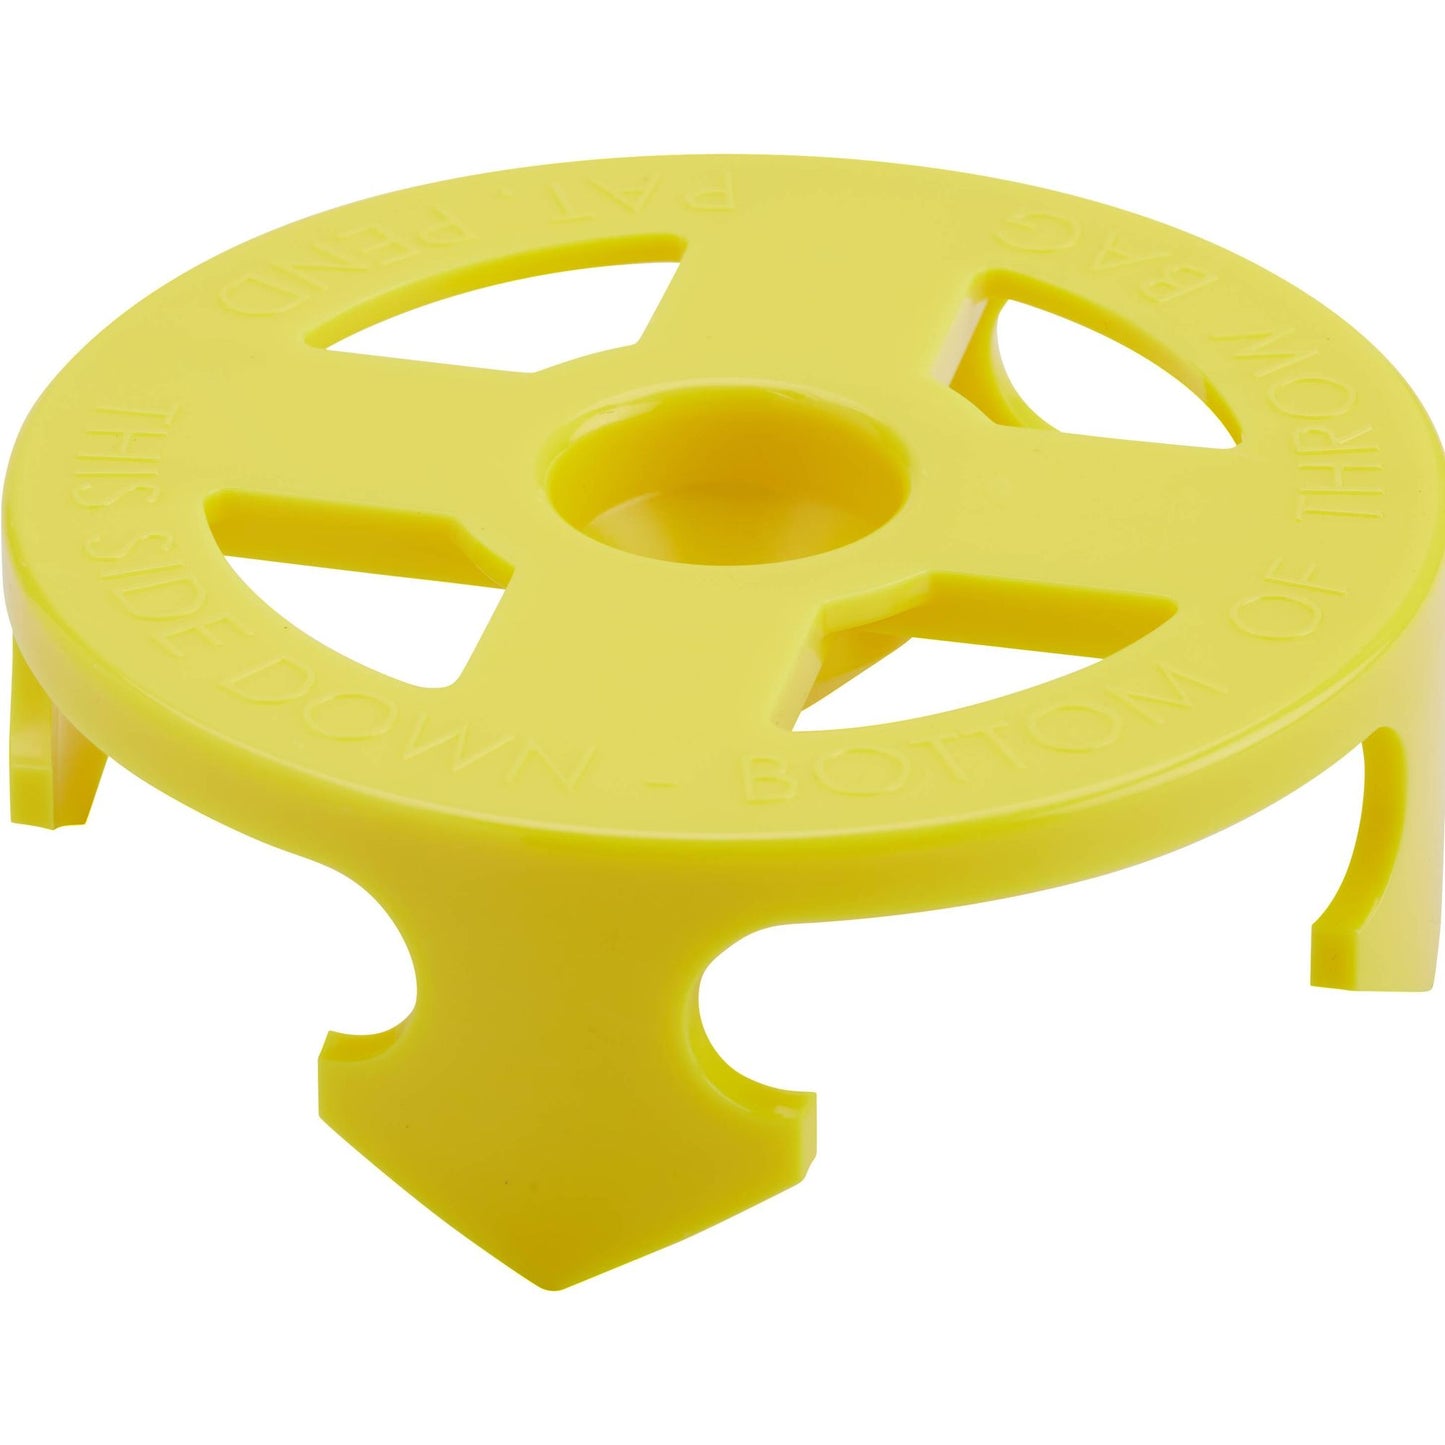 A yellow plastic Wild Water Snag Plate with a hole in the middle, made by NRS.